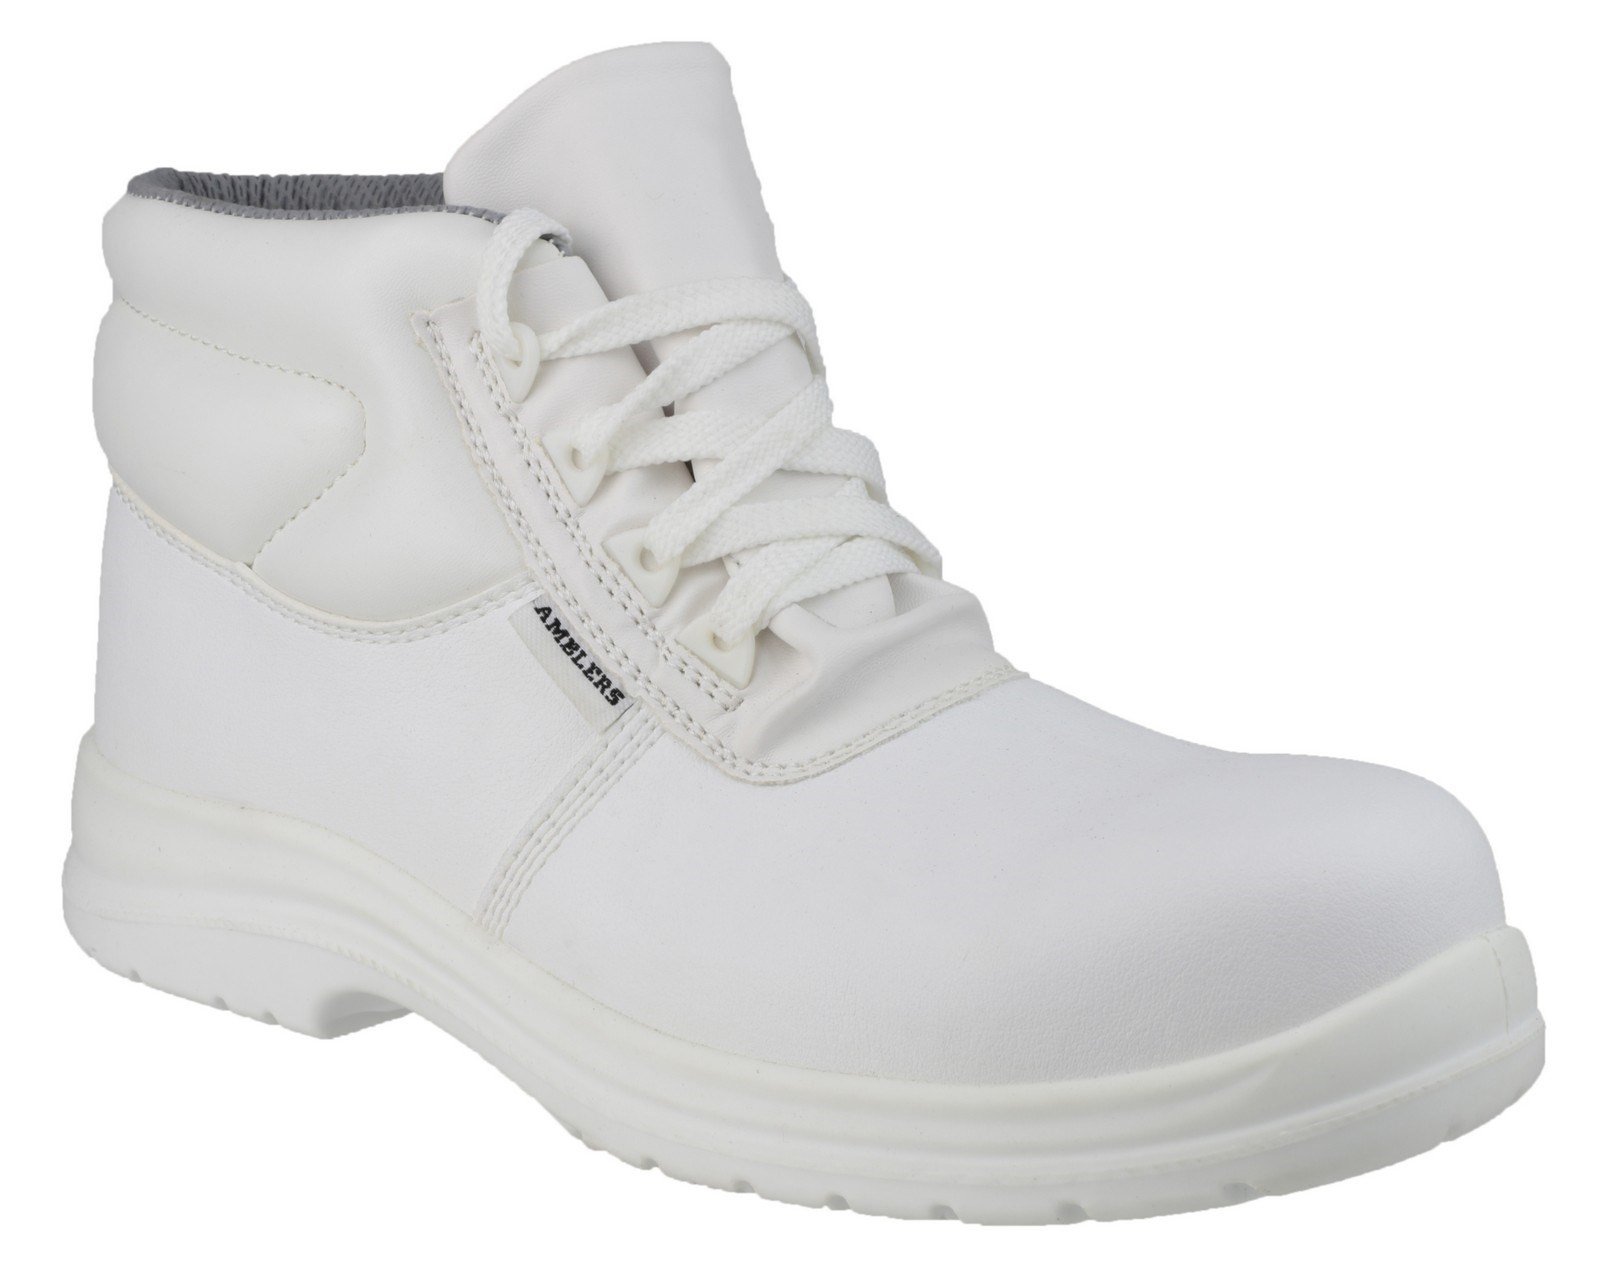 Amblers Unisex Safety Metal-Free Water-Resistant Lace up Boot White 21895 - White 3